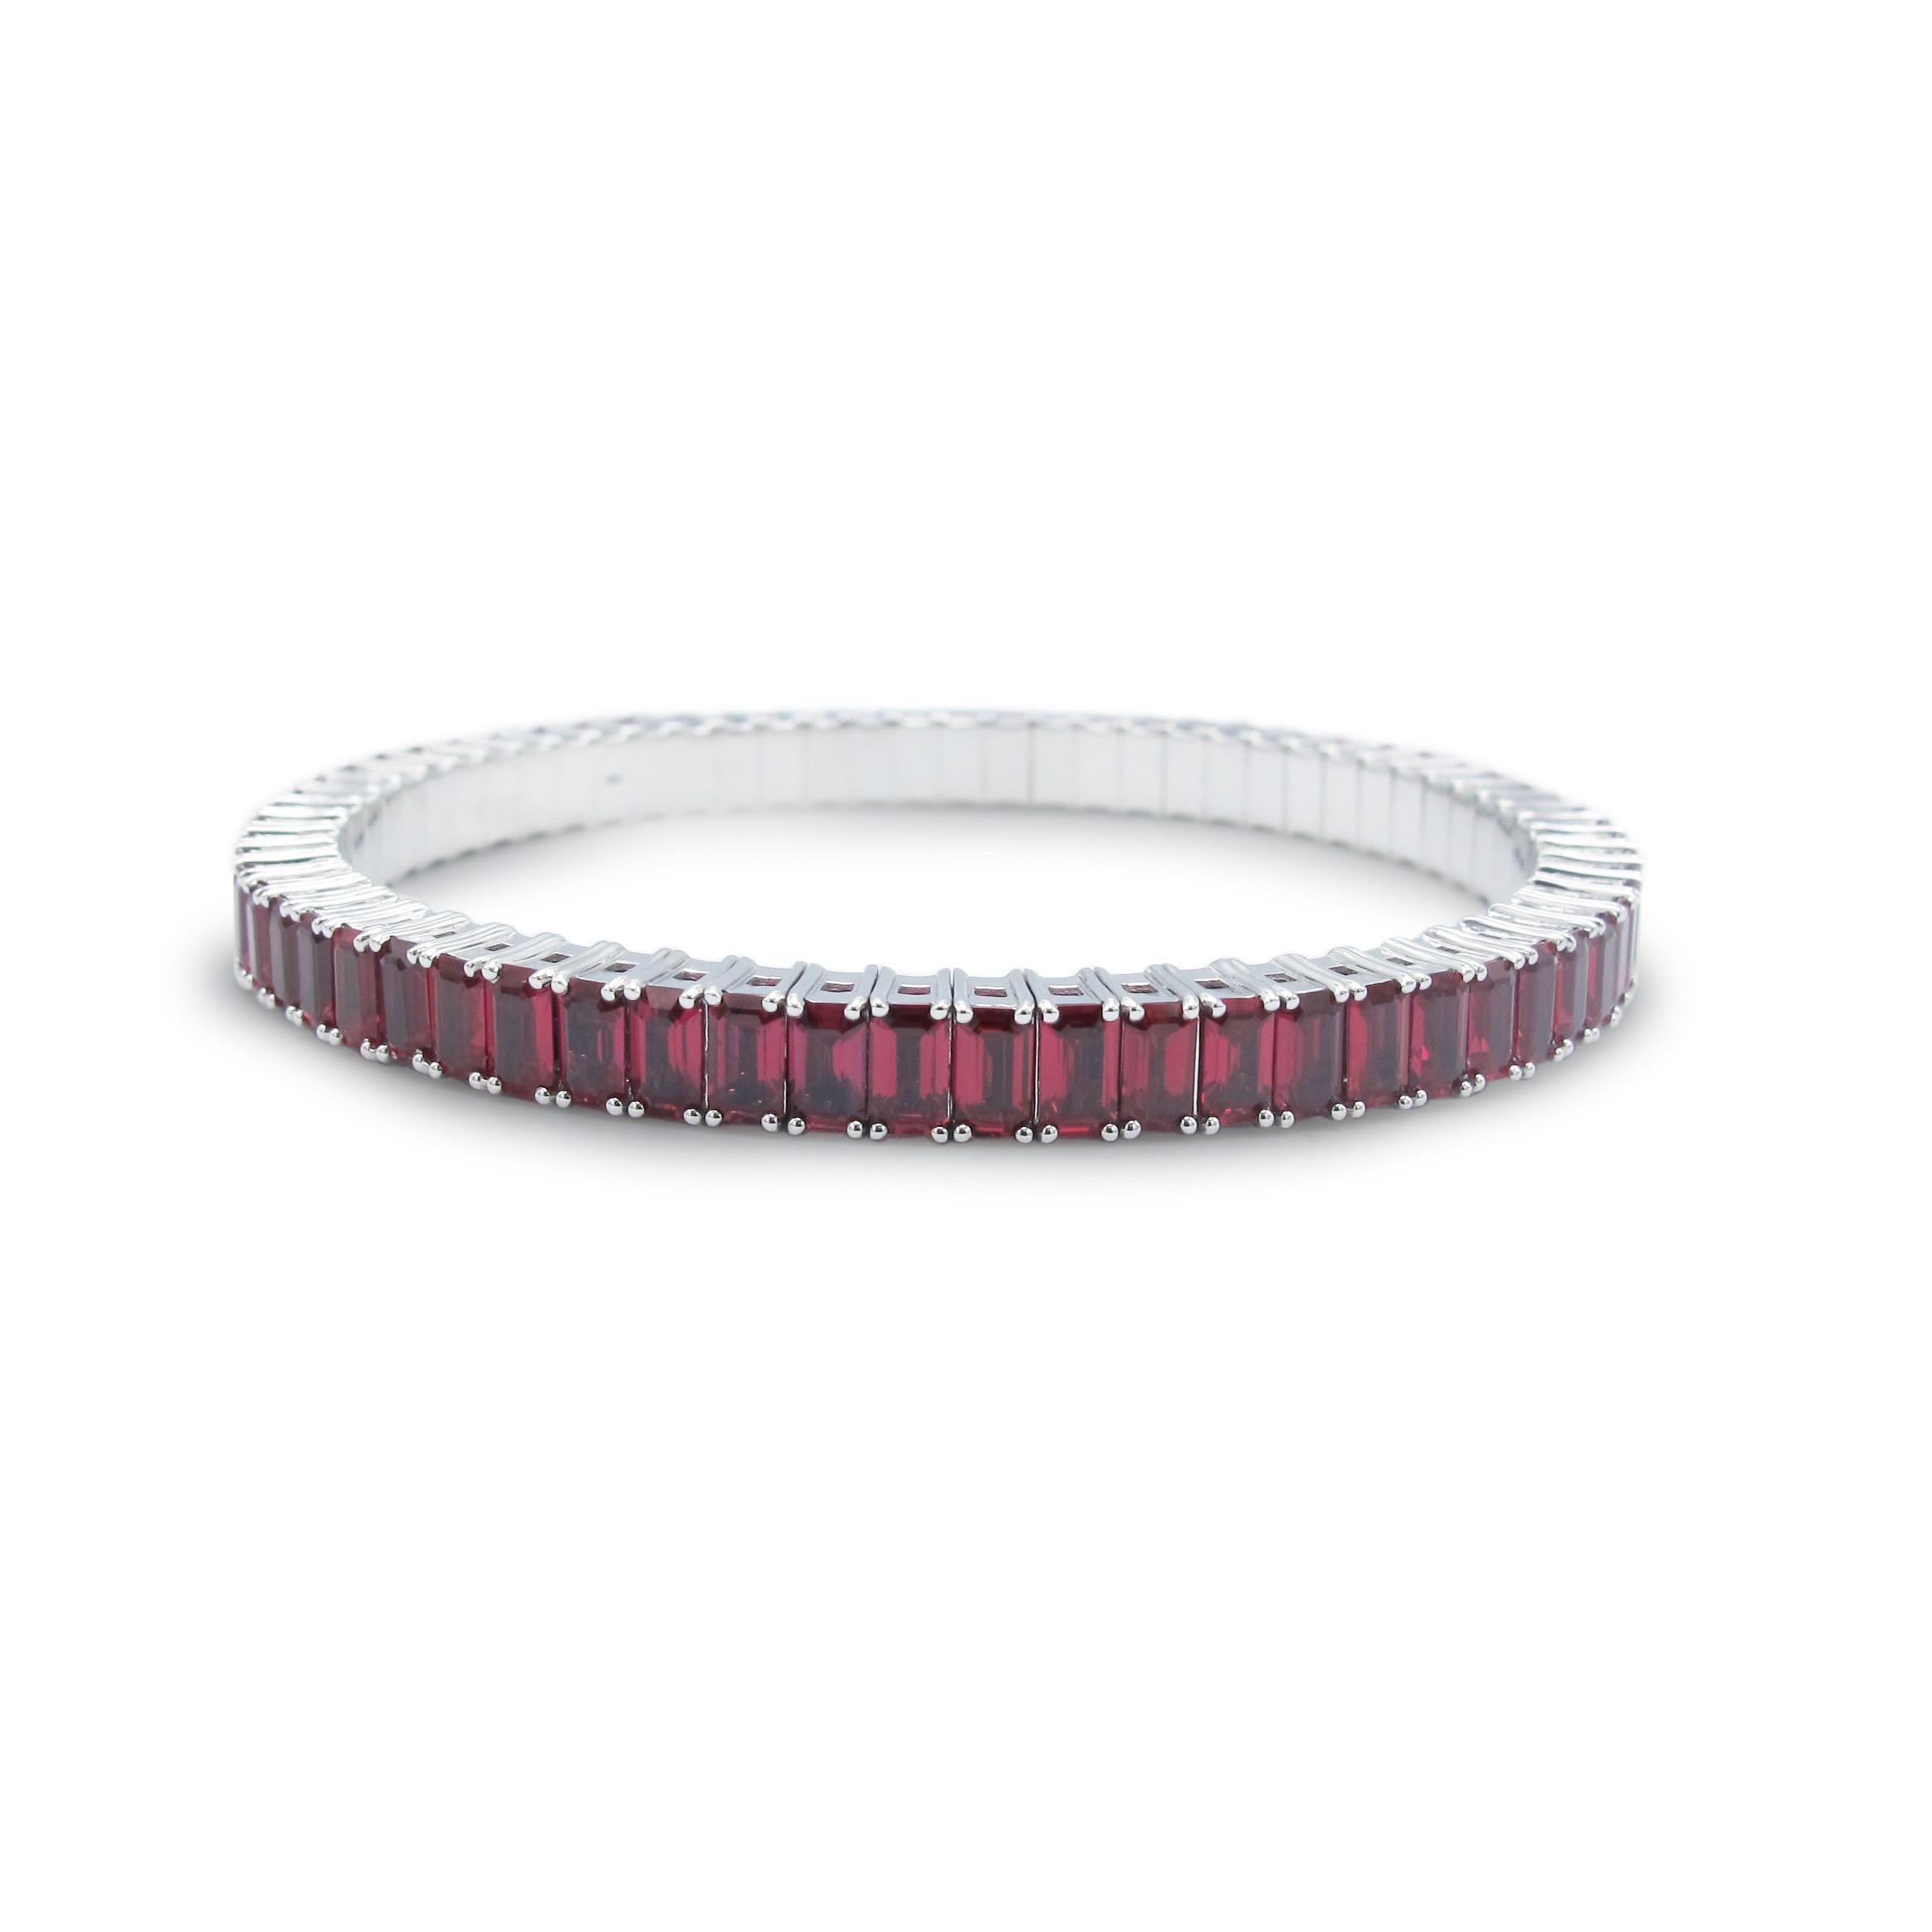 From the vault at Emilio Jewelry located on New York's iconic Fifth Avenue,
This bangle is stretchable so there is no sizing needed! You can simply pull it and it stretches thanks to our special jewelers talent! Featuring 19.02 carats of gorgeous